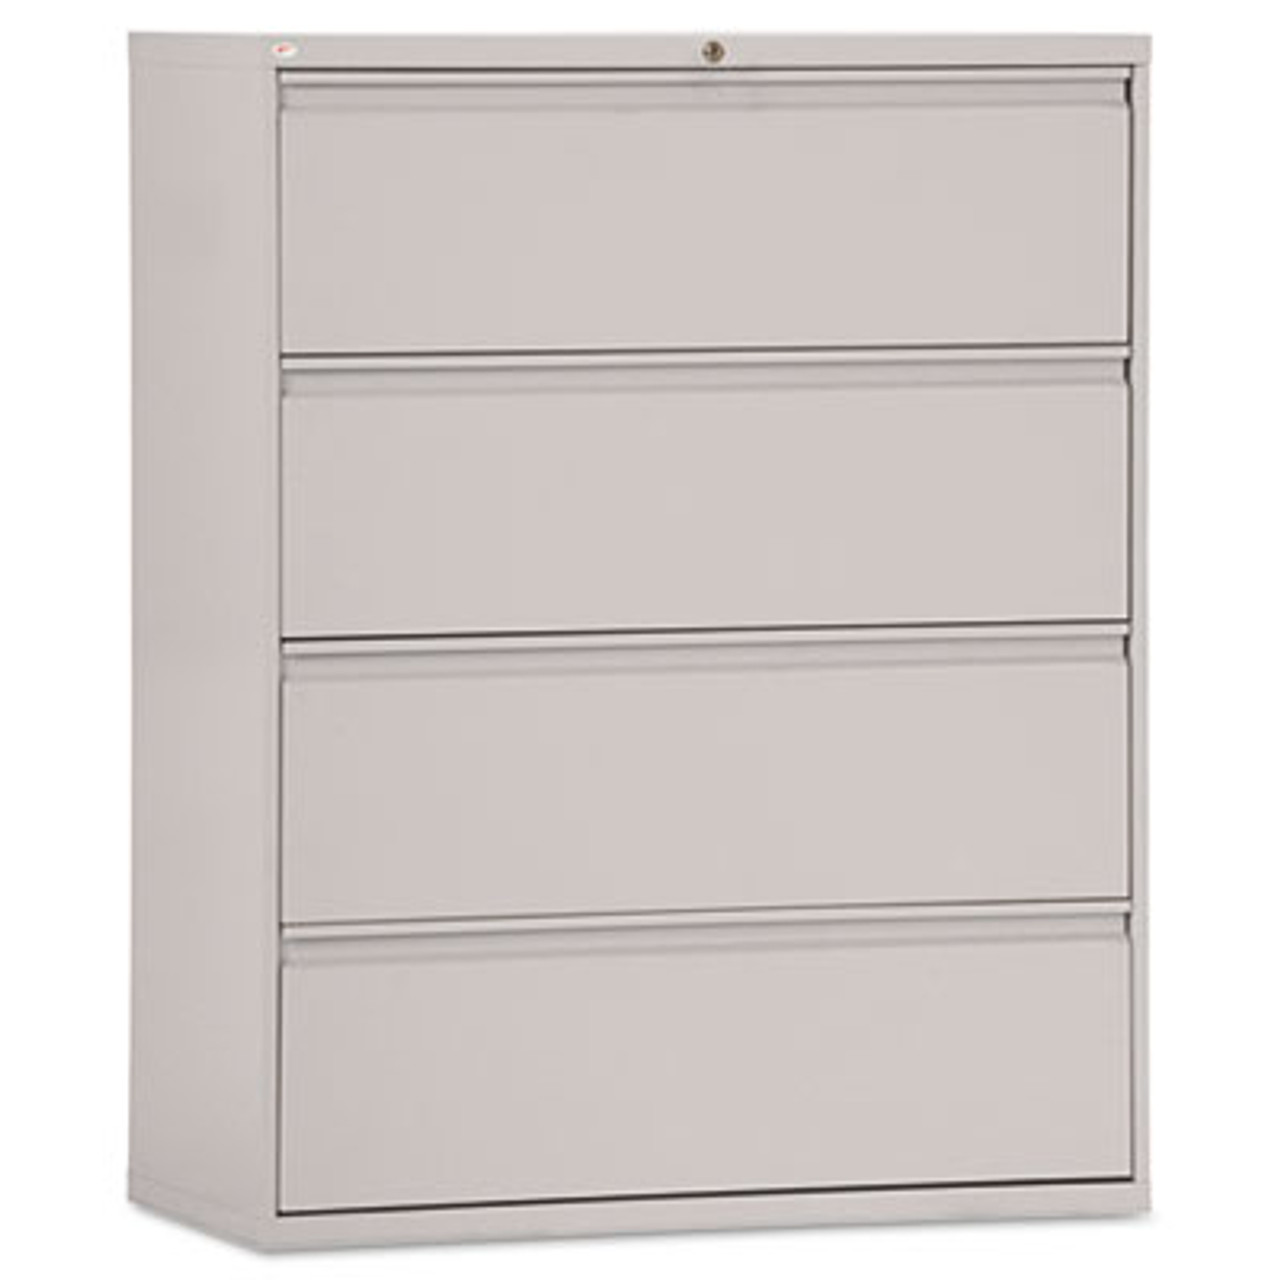 Four-Drawer Lateral File Cabinet, 42w x 19-1/4d x 53-1/4h, Light Gray